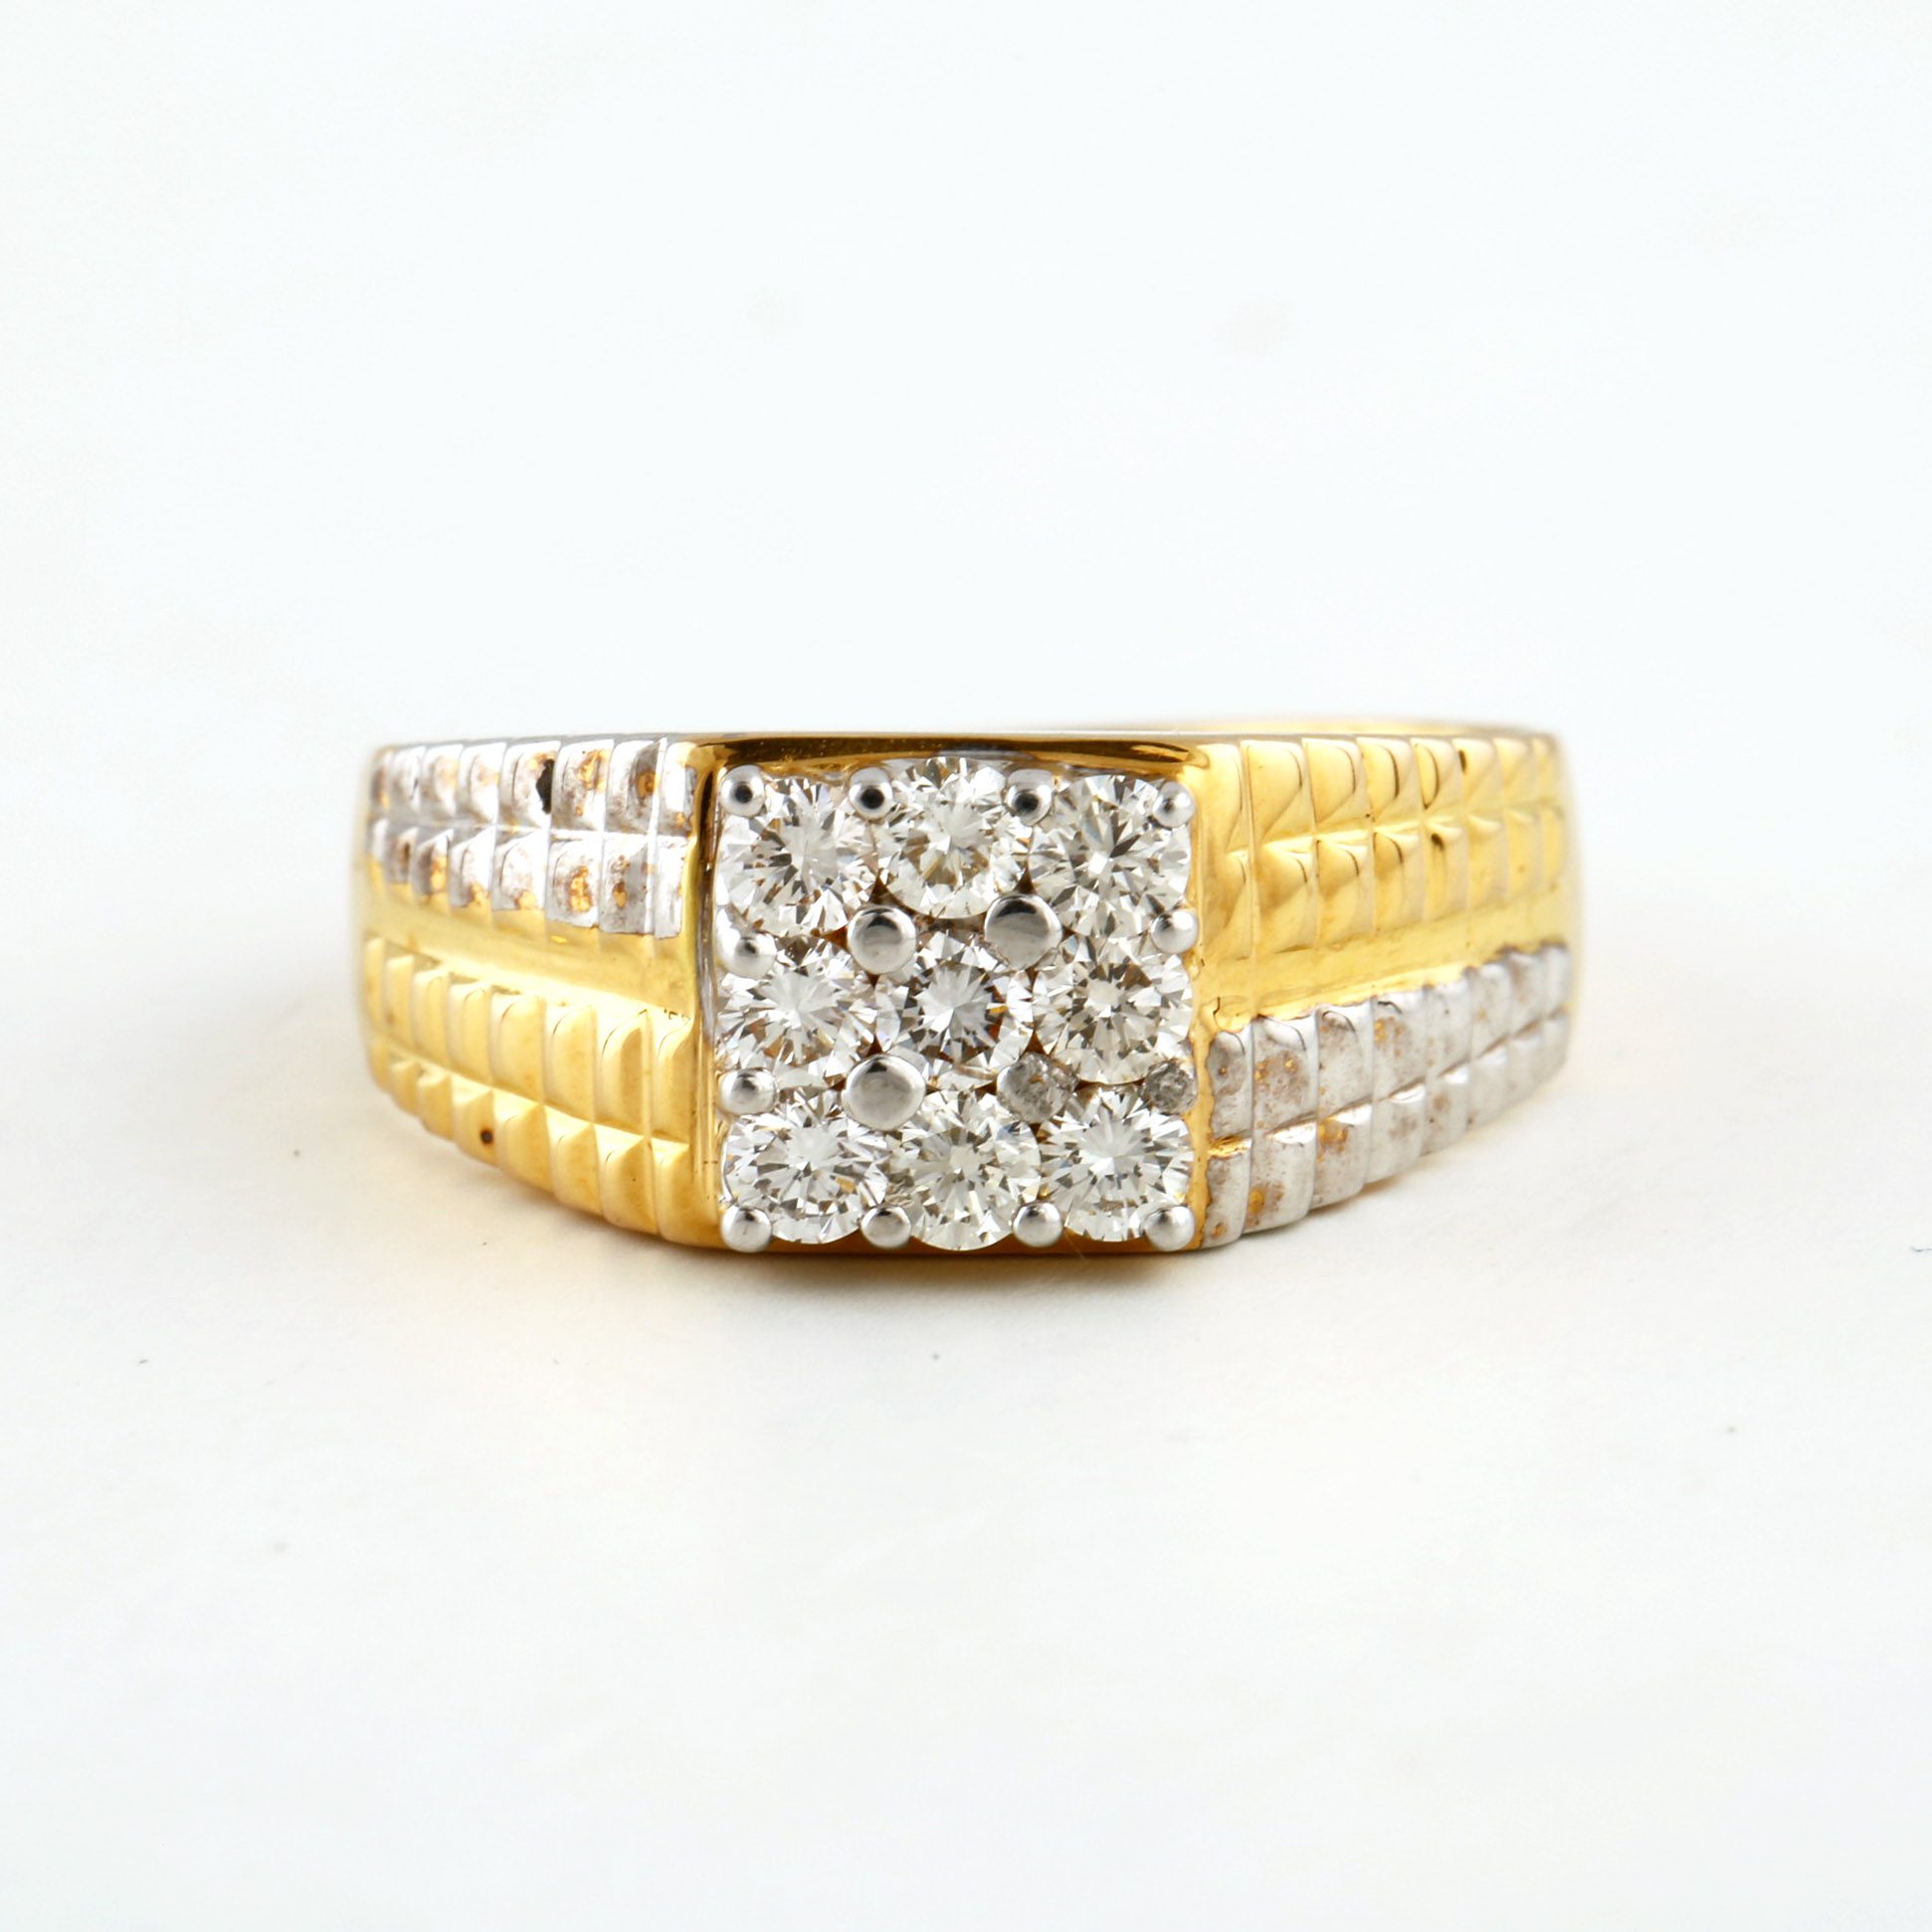 Mens 14k Gold Two Toned Diamond Ring 10.5 - Jewels in Time